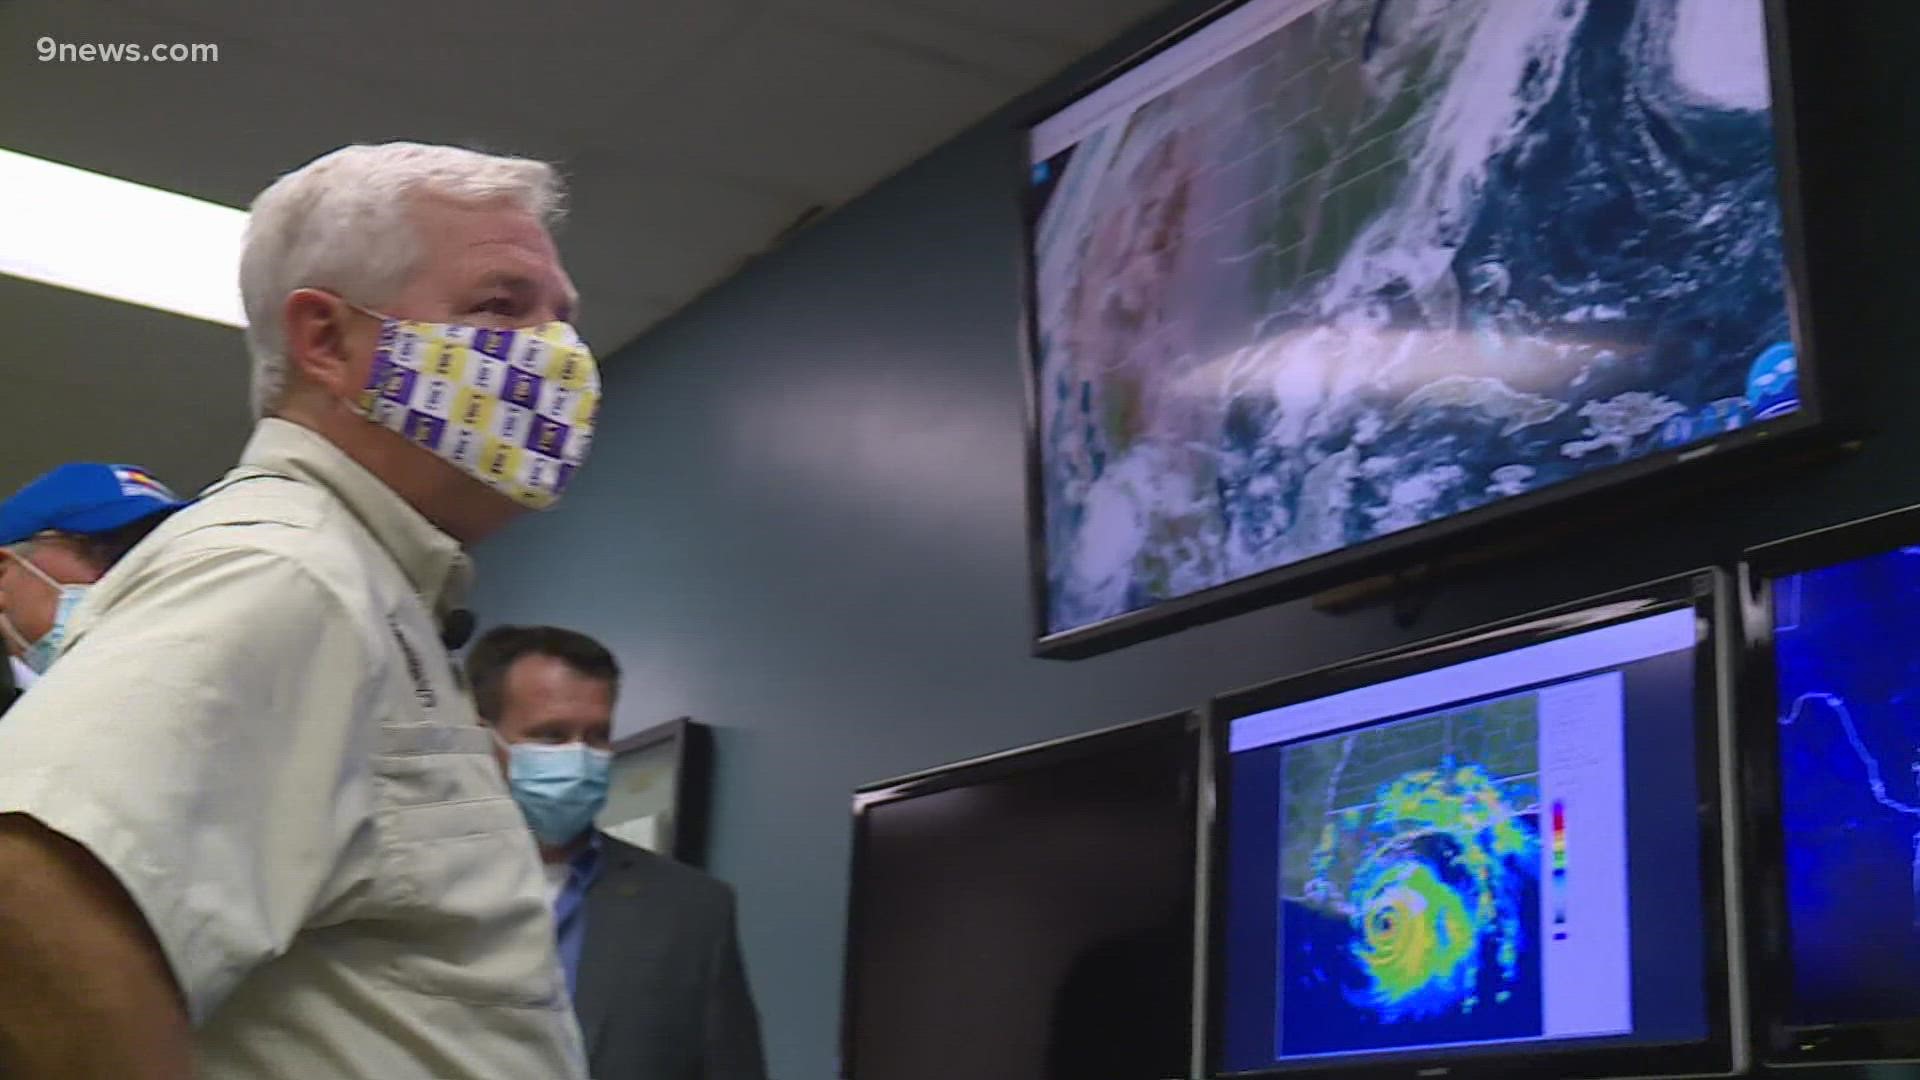 The town of Slidell, Louisiana was hit hard by Hurricane Ida – the town's mayor visited hurricane experts at CSU to learn and better prepare for next time.